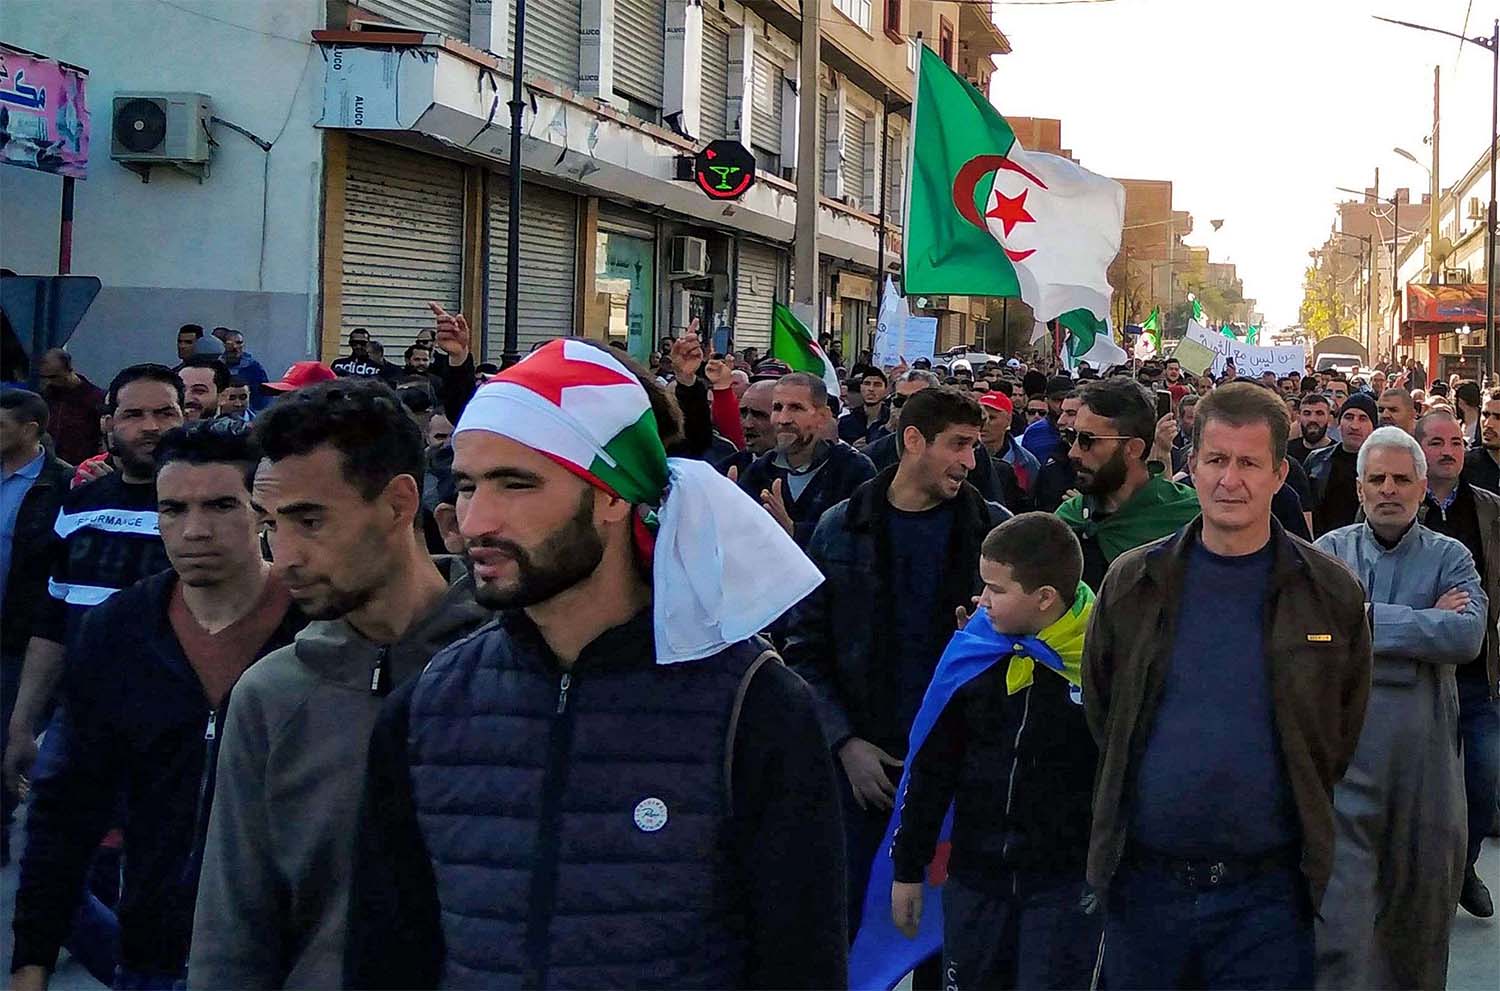 Algerians march in an anti-government demonstration in the Algerian city of Bordj Bou Arreridj on Feb. 14